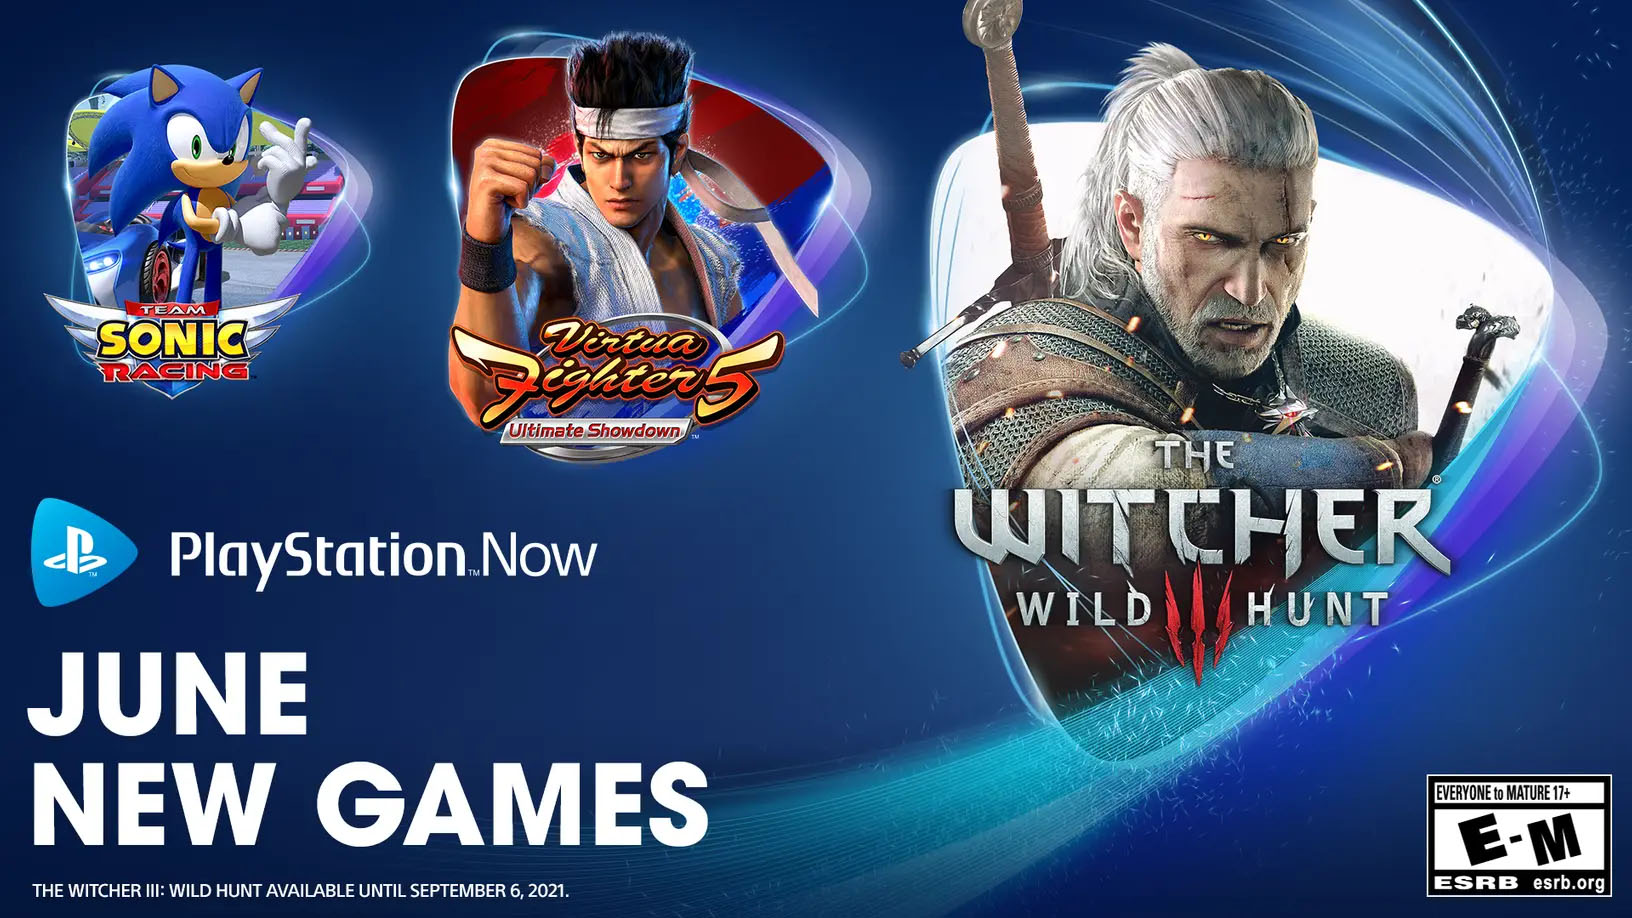 PlayStation Now Adds The Witcher 3, Sonic Mania, More in June 2021